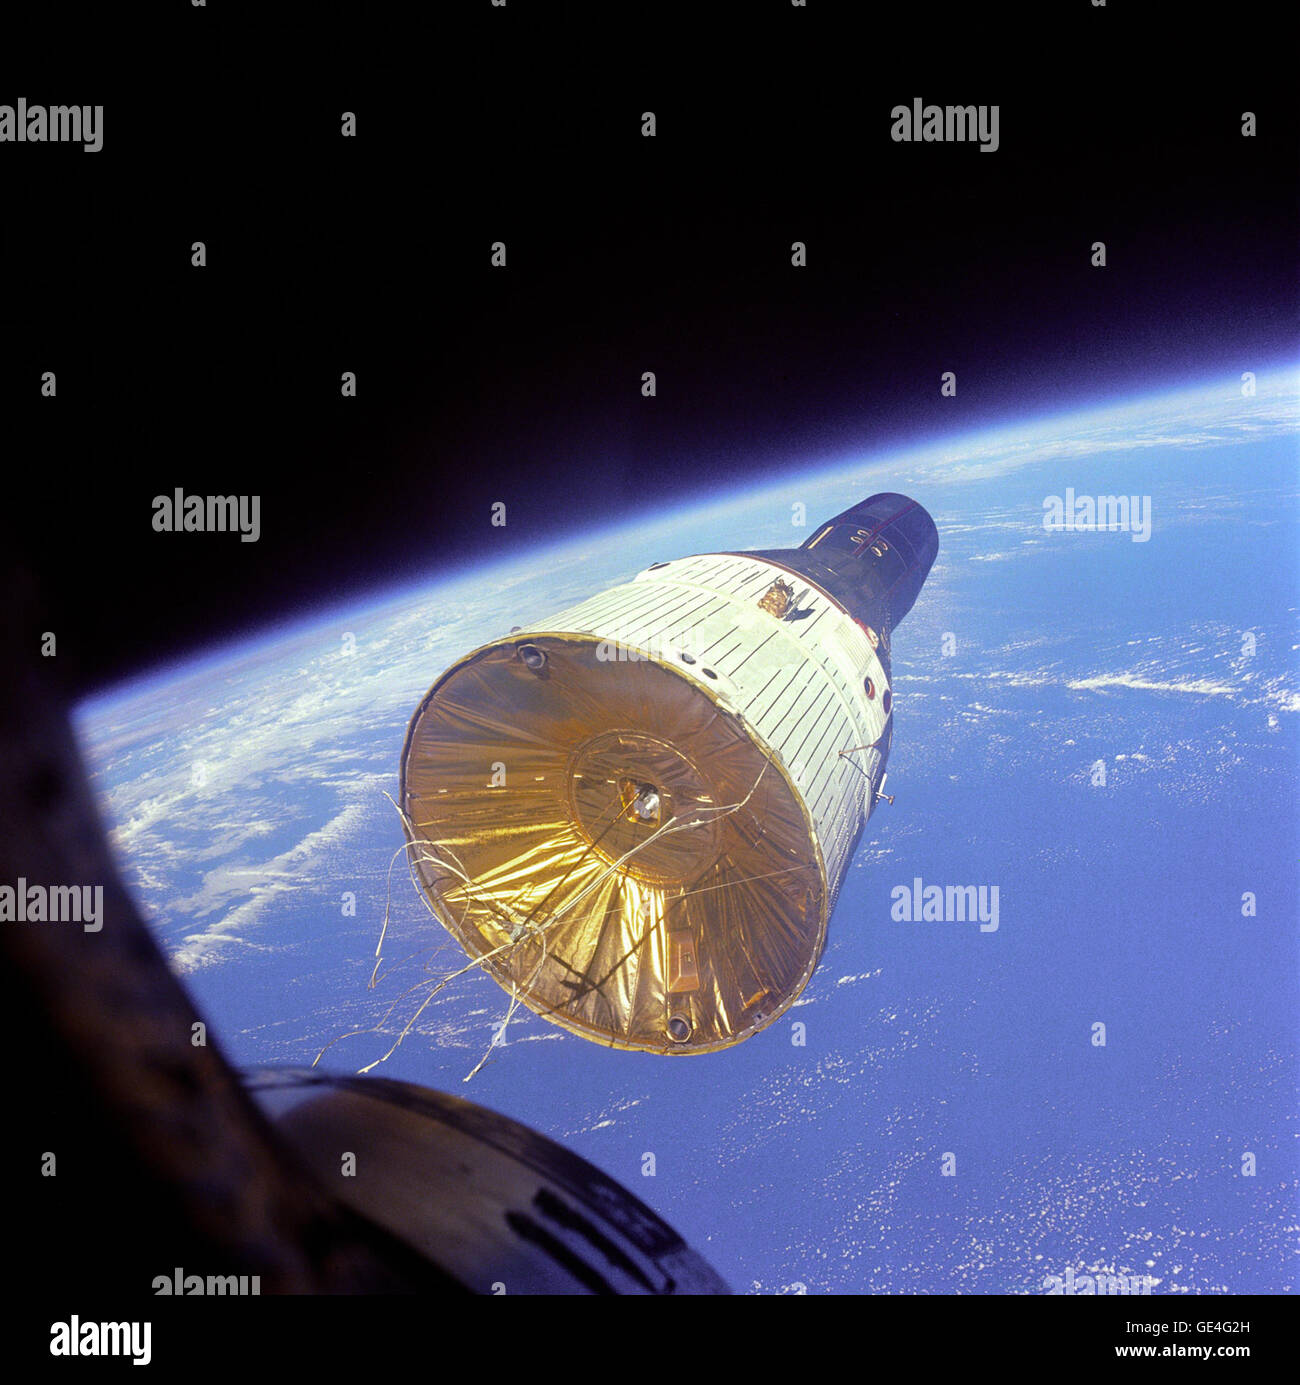 (December 15, 1965) NASA successfully completed its first rendezvous mission with two Gemini spacecraft-Gemini VII and Gemini VI-in December 1965. This photograph, taken by Gemini VI crewmembers Walter Schirra and Thomas Stafford, shows Gemini VII in orbit 160 miles (257 km) above Earth. The main purpose of Gemini VI was the rendezvous with Gemini VII. The main purpose of Gemini VII, on the other hand, was studying the long-term effects of long-duration (up to 14 days) space flight on a two-man crew. The pair also carried out 20 experiments, including medical tests. Although the principal obje Stock Photo